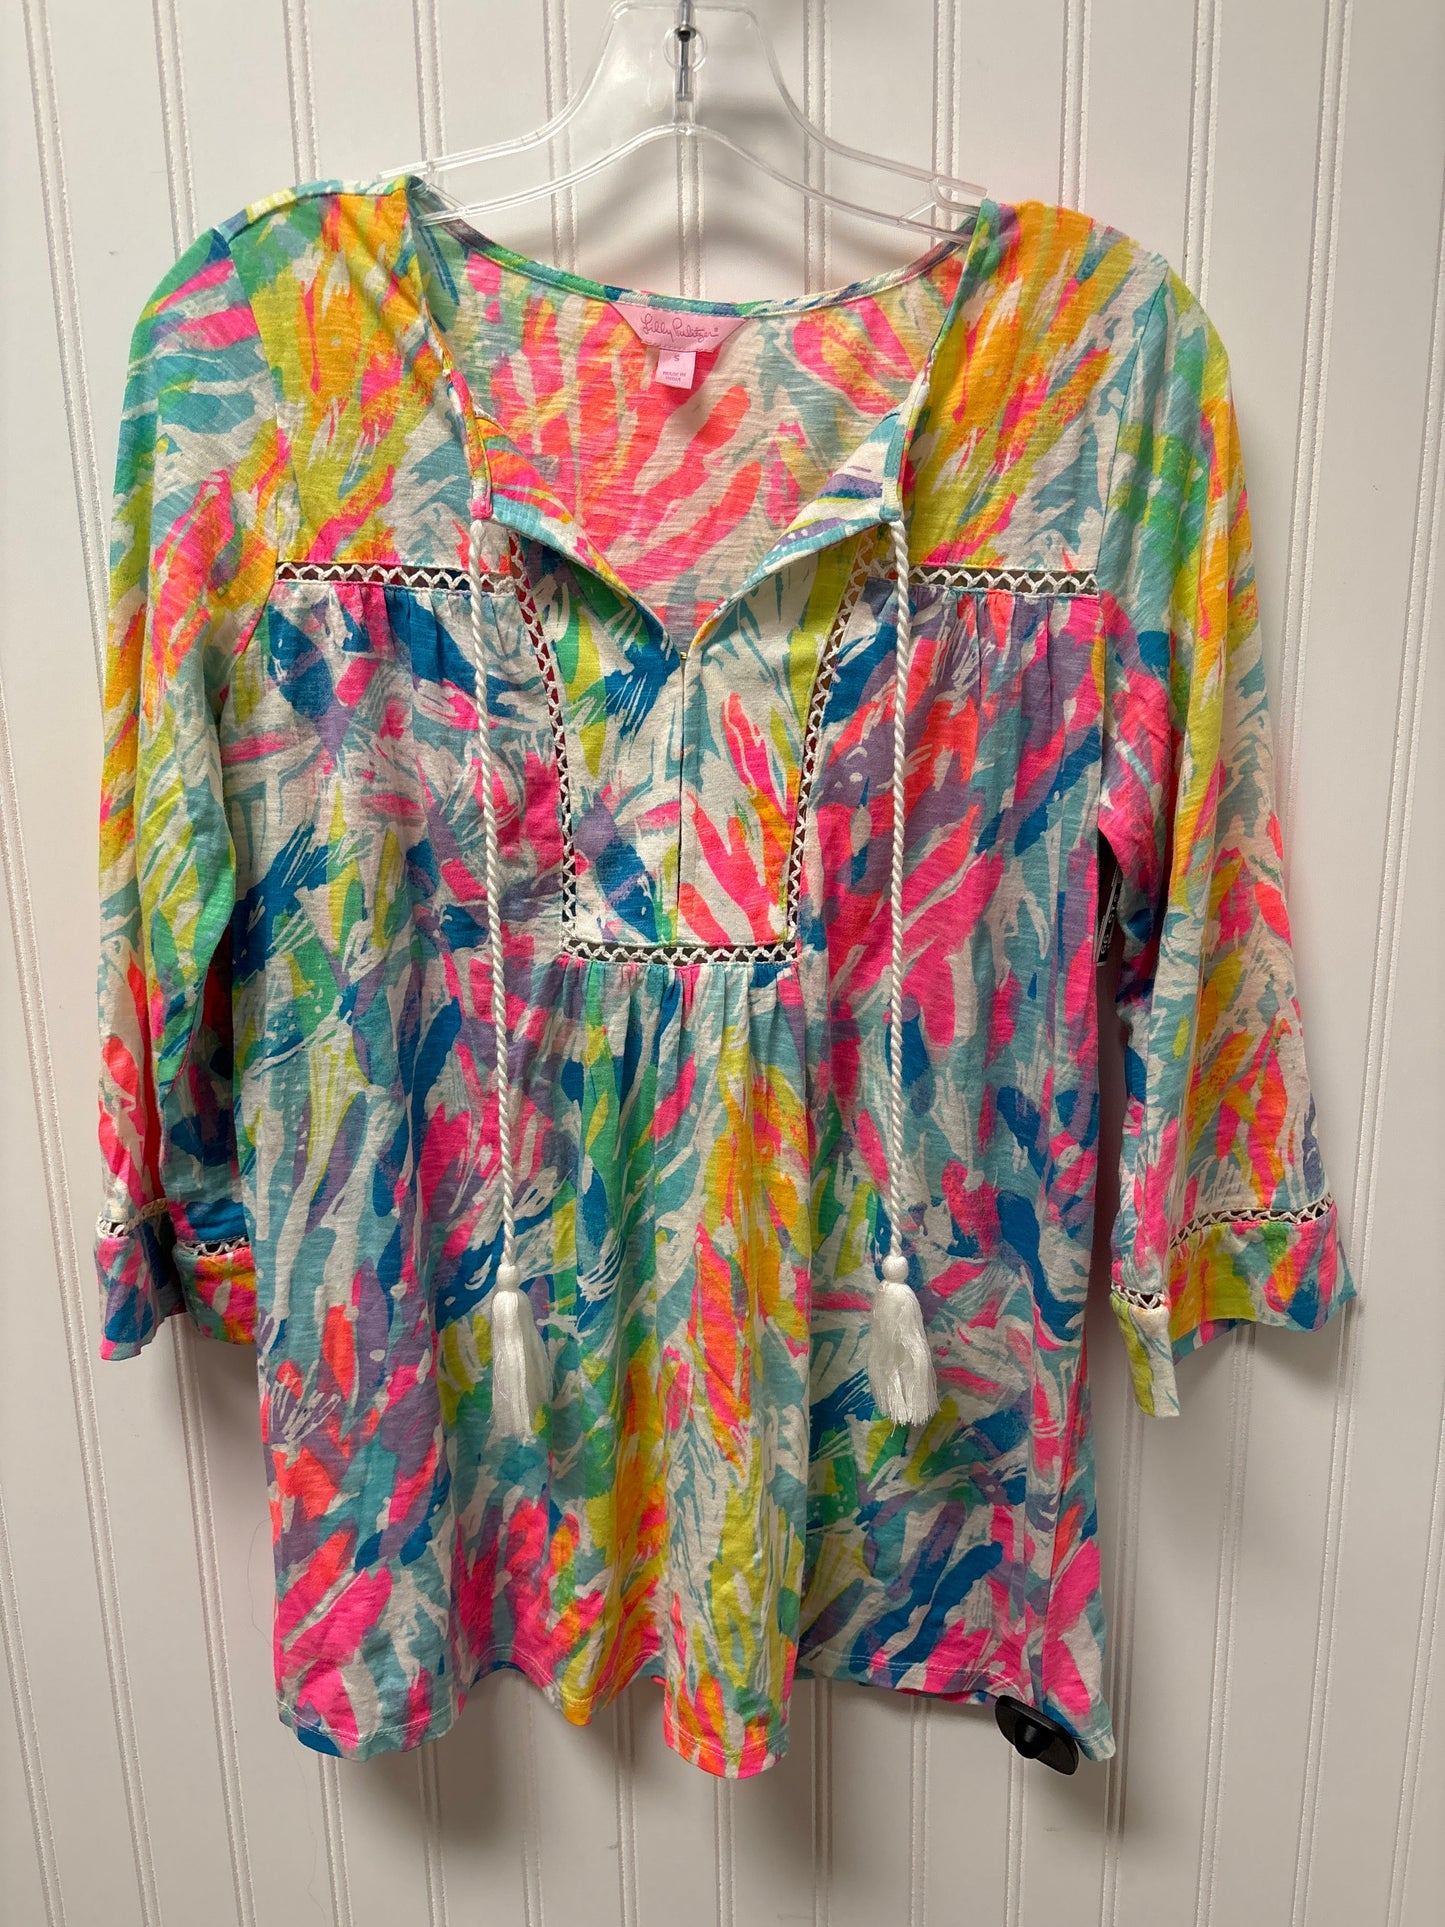 Multi-colored Top Long Sleeve Designer Lilly Pulitzer, Size S